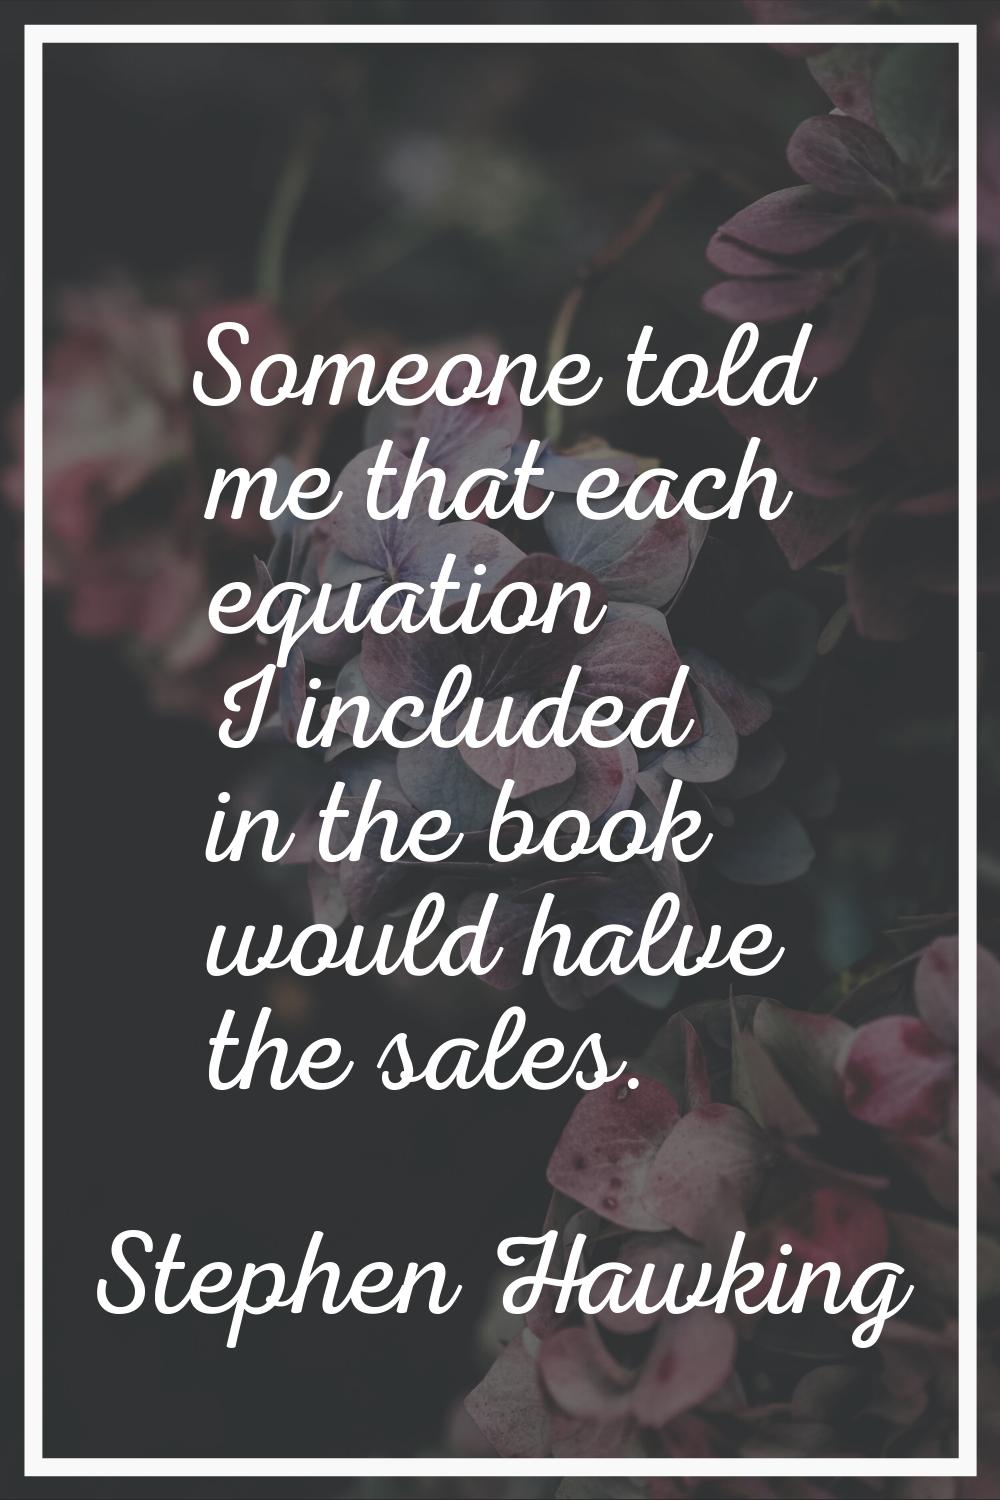 Someone told me that each equation I included in the book would halve the sales.